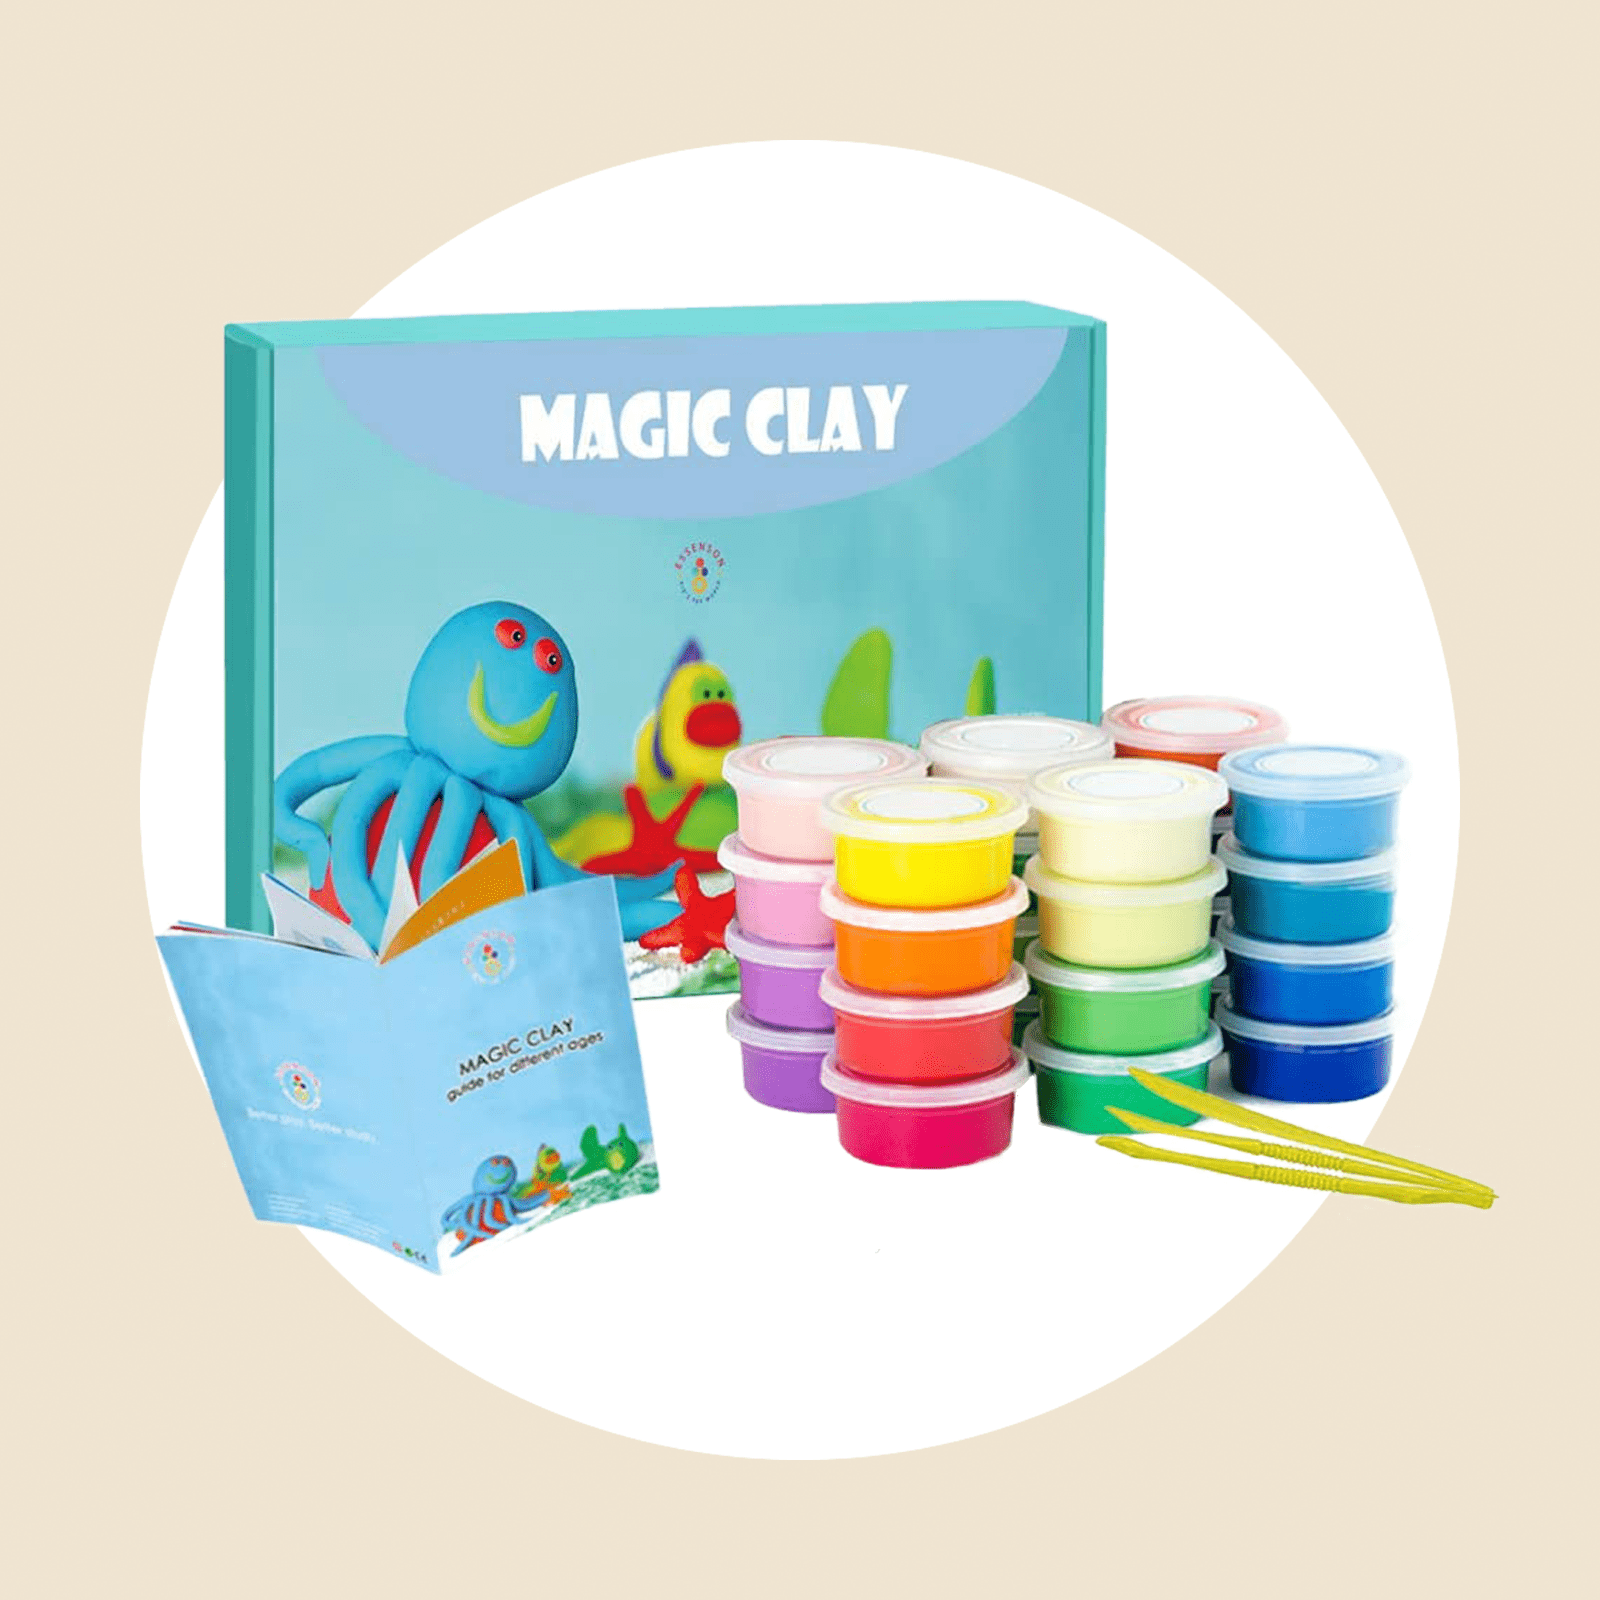 https://www.tasteofhome.com/wp-content/uploads/2022/04/modeling-clay-kit-24-colors-ecomm-via-amazon.png?fit=700%2C700